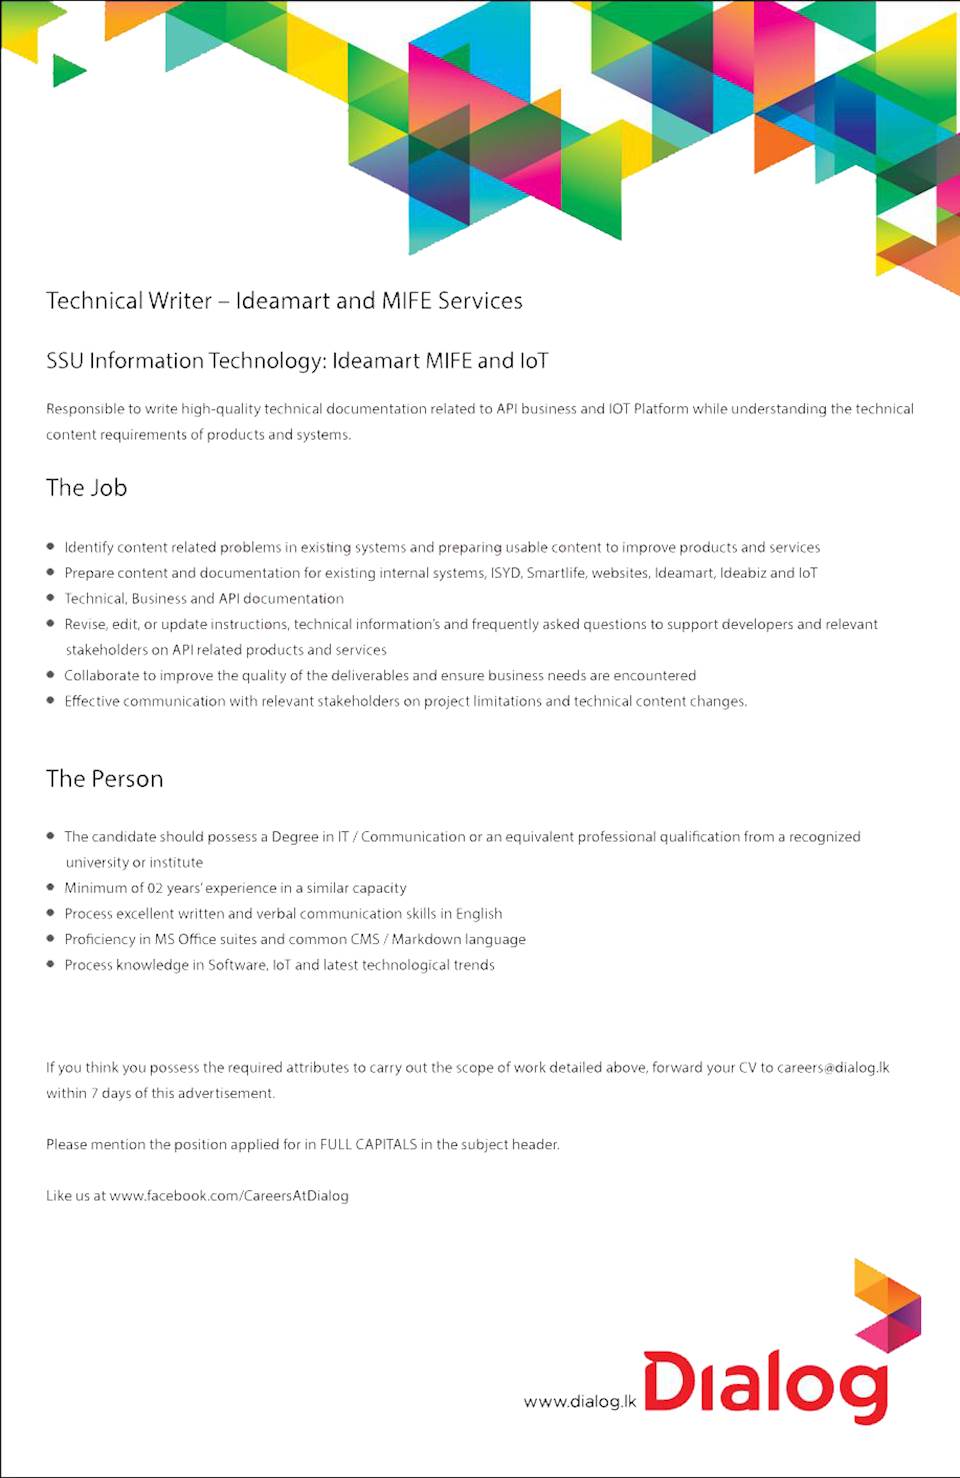 Technical Writer - Ideamart and MIFE Services